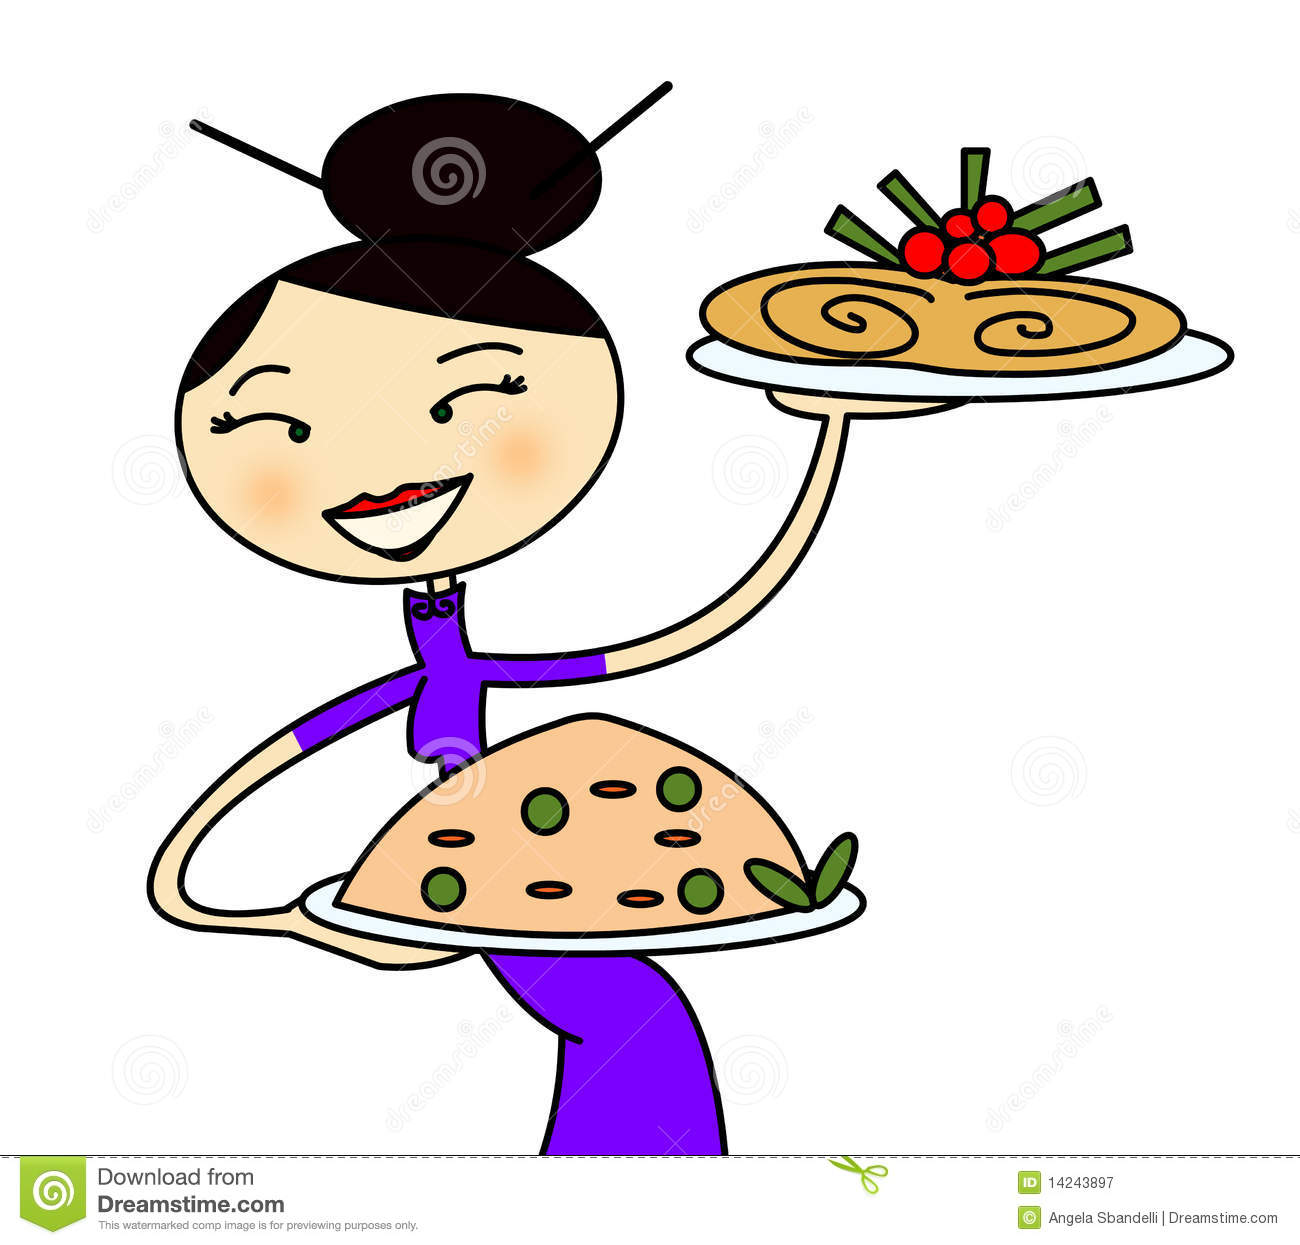 Chinese Restaurant Royalty Free Stock Photography   Image  14243897